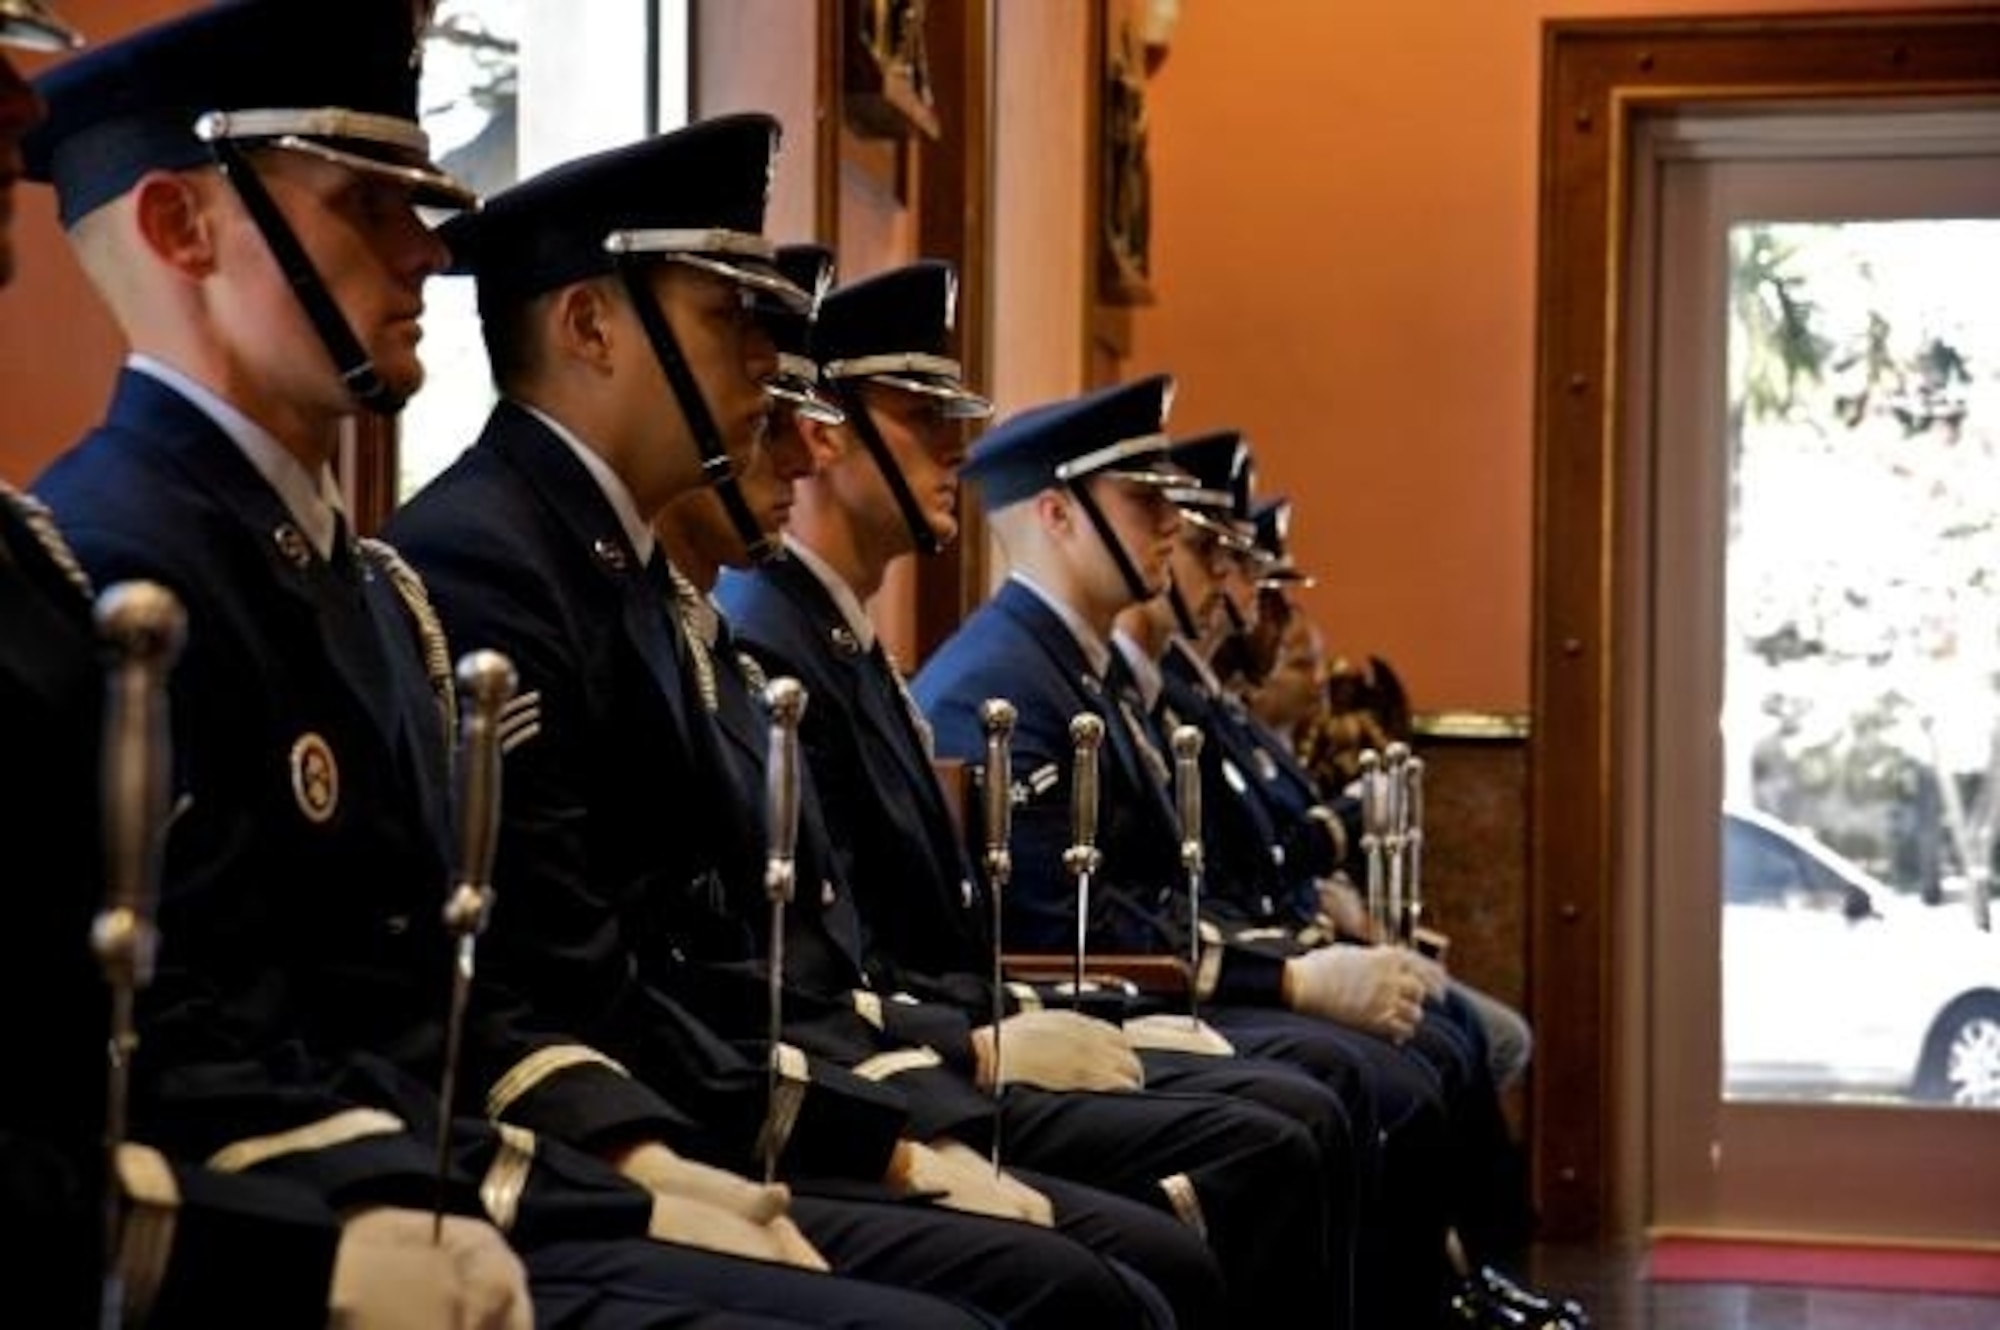 The Team Andersen Honor Guard sits, showcasing their military bearing while waiting at an event. The Team Andersen Honor Guard's primary mission is to provide final military honors to our fallen military members. (Courtesy Photo)